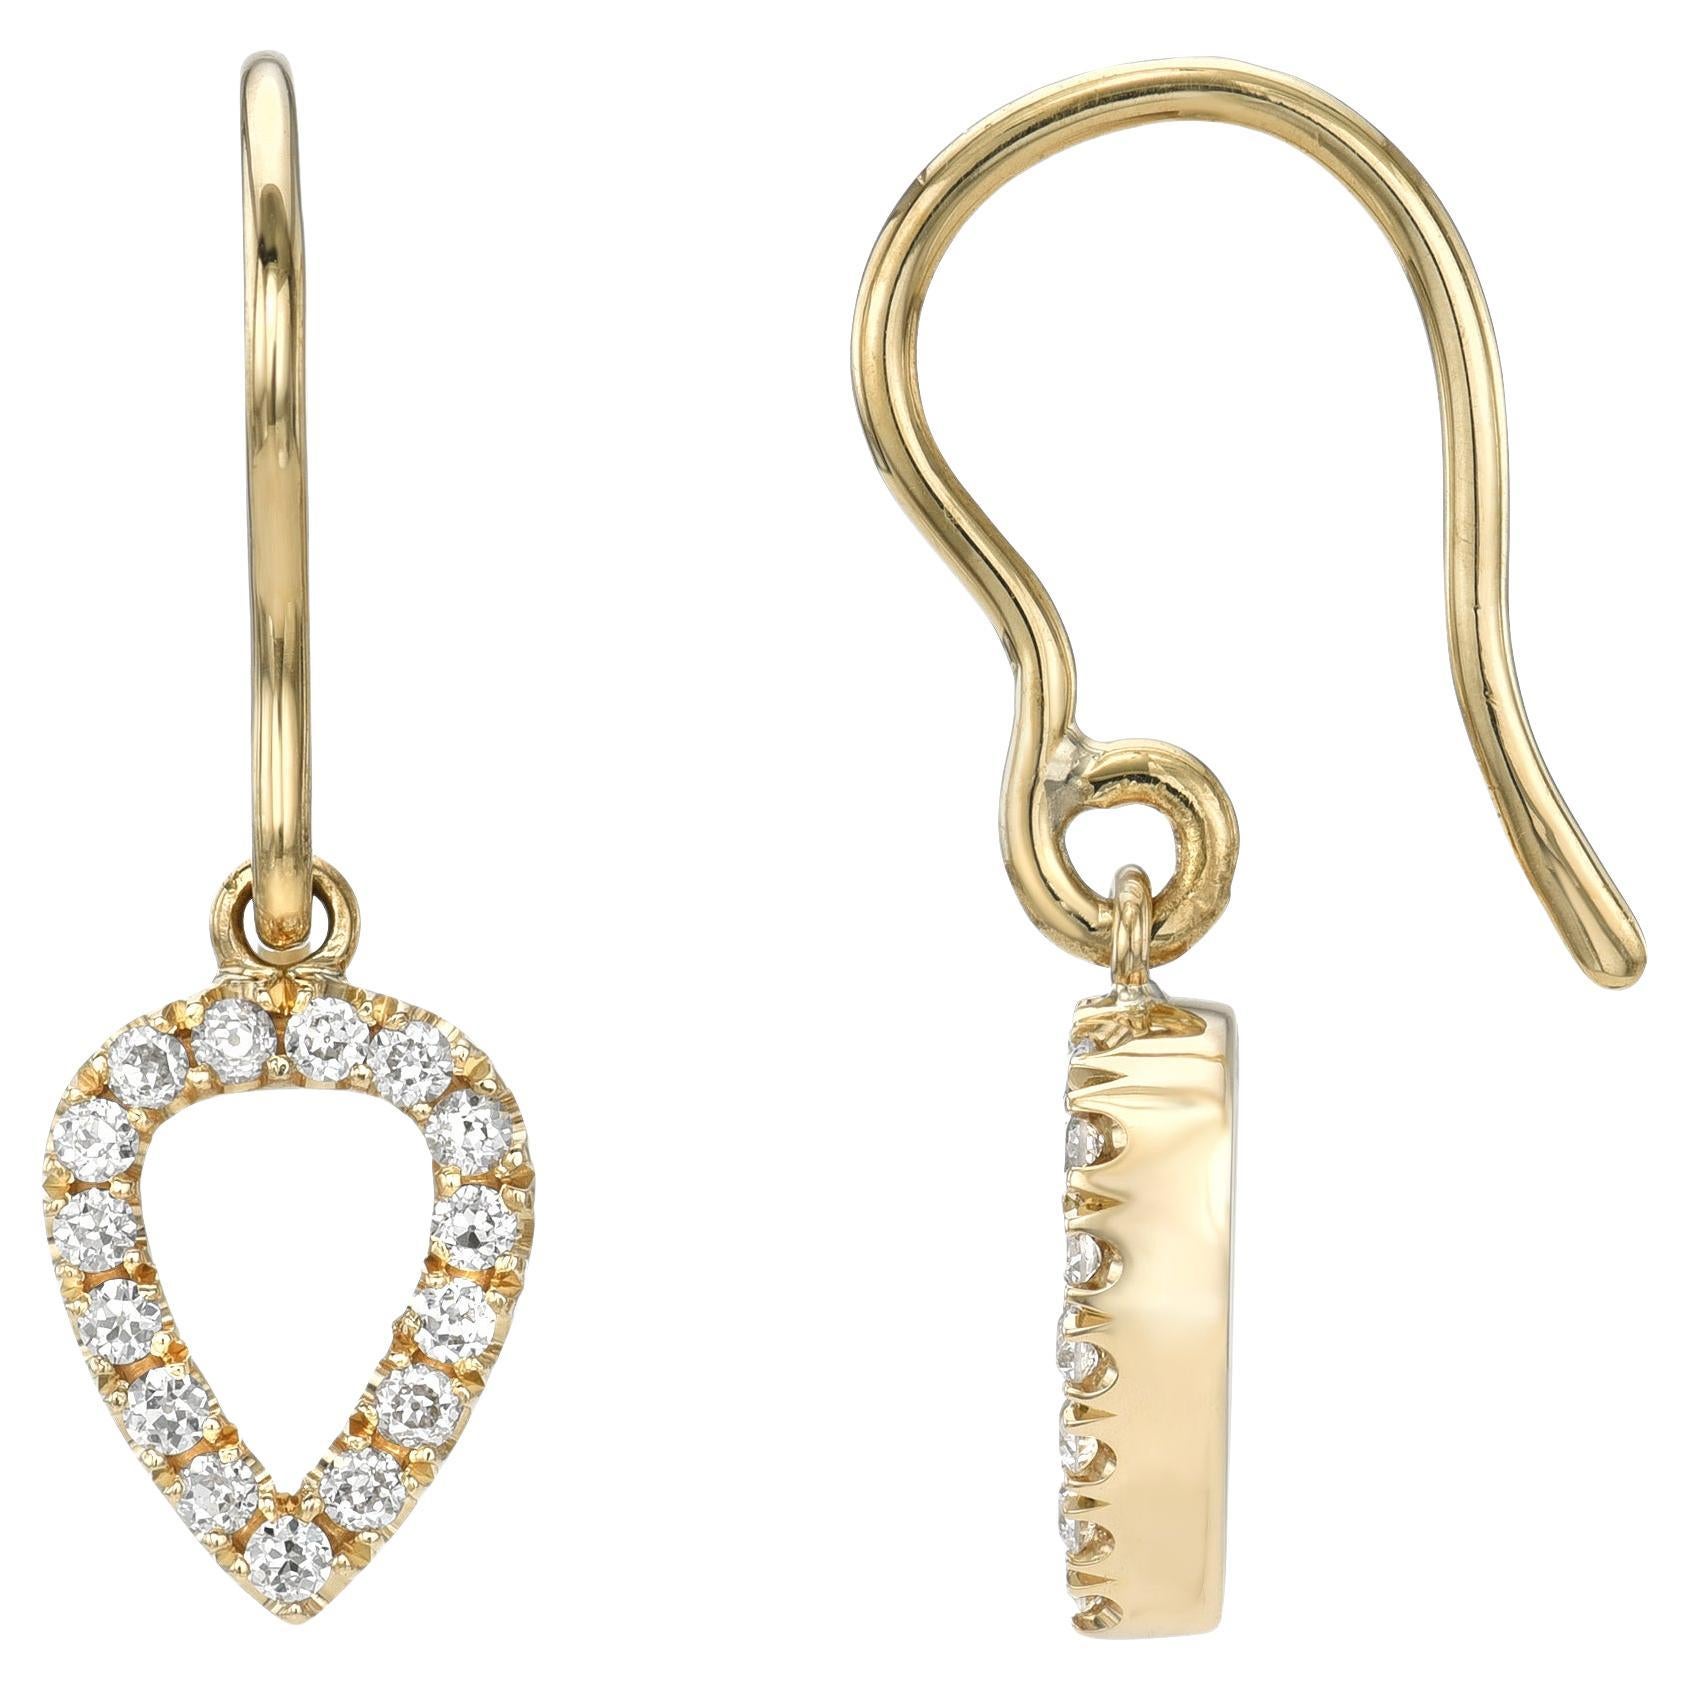 Handcrafted Perry Old European Cut Diamond Drop Earrings by Single Stone